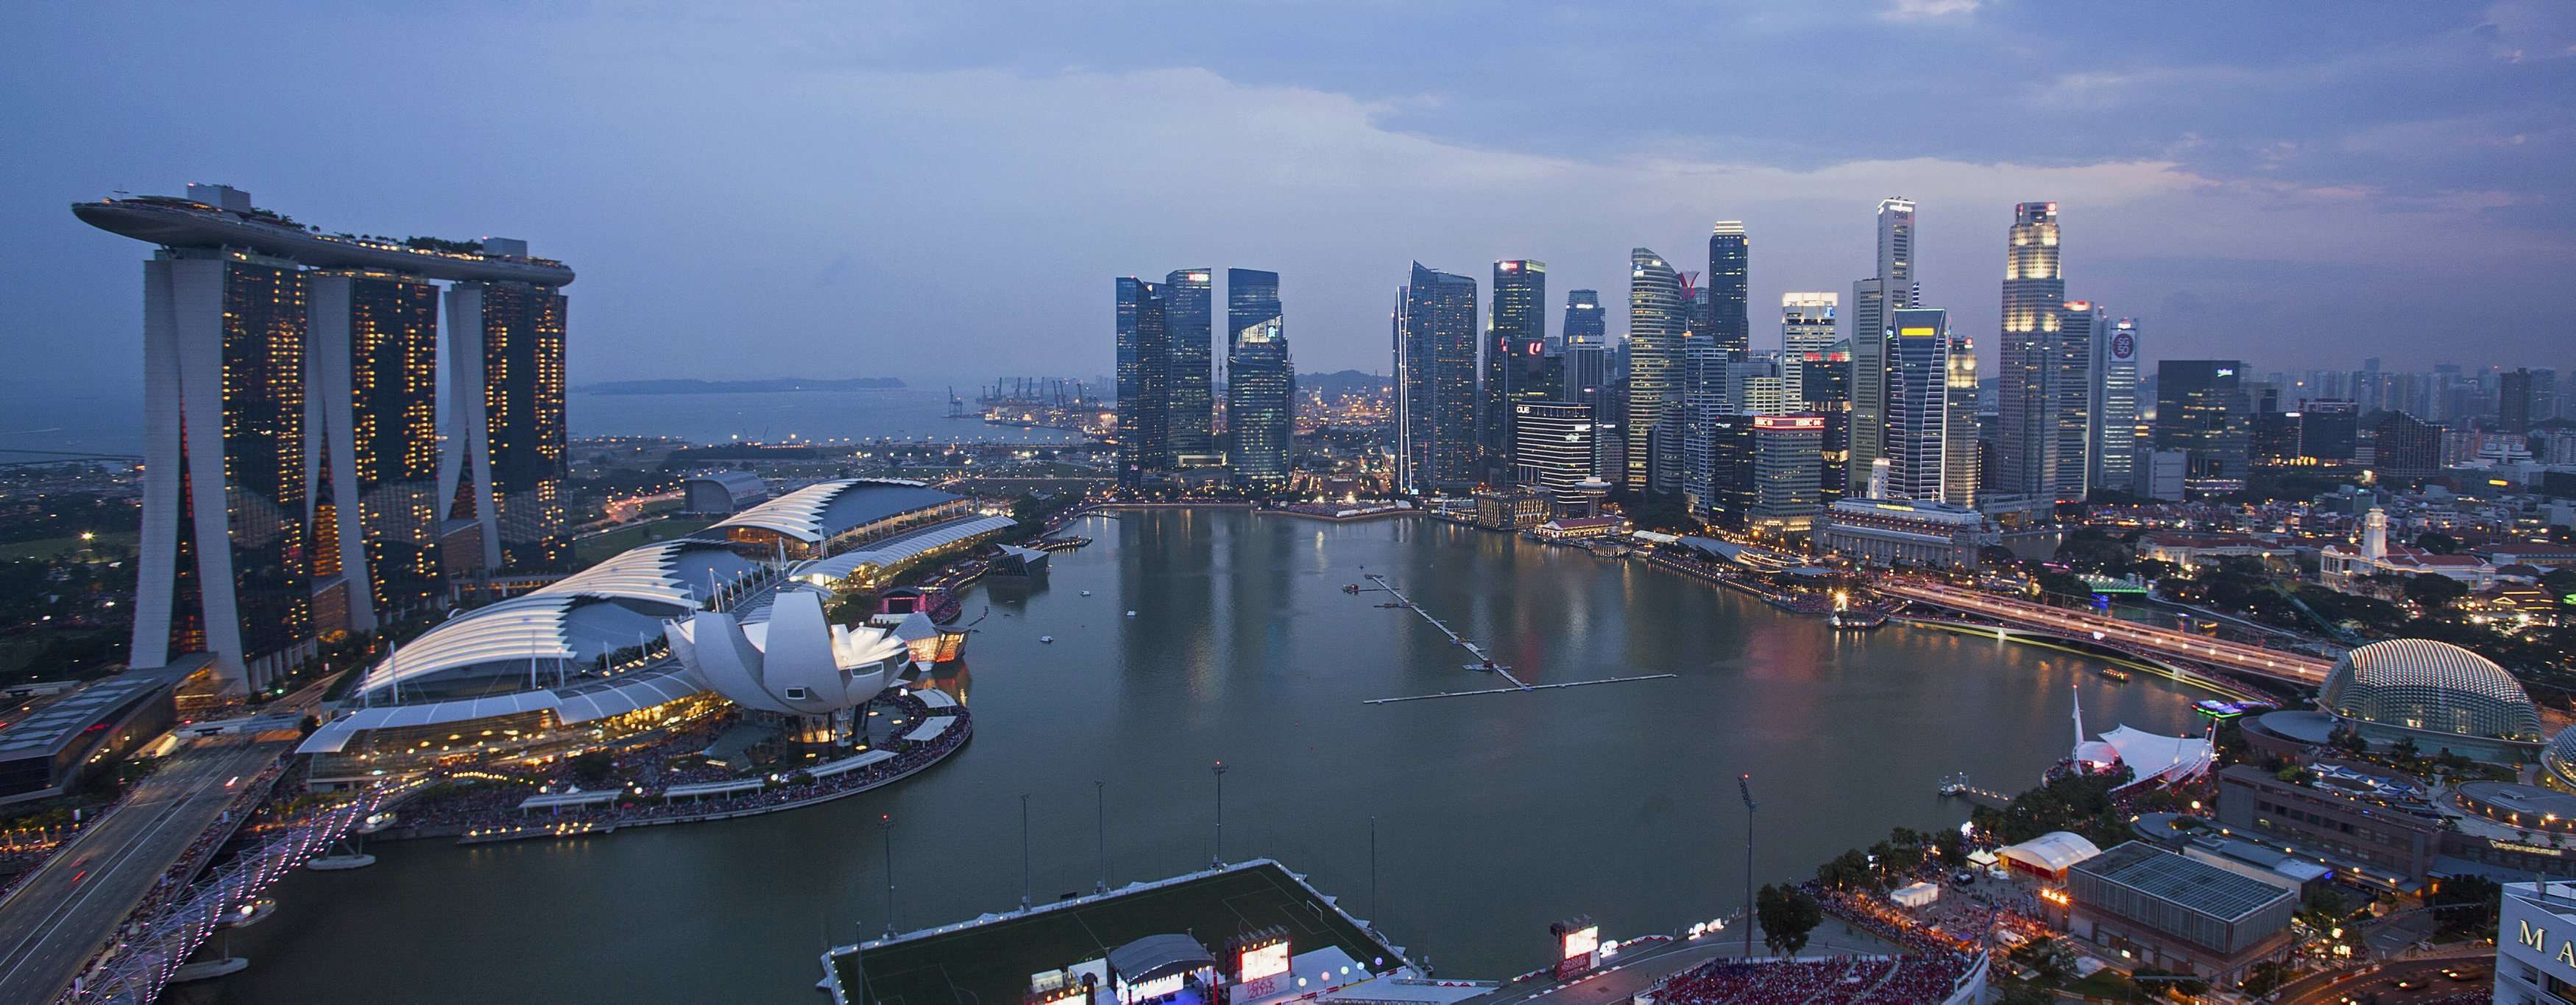 The Singapore skyline has had a major makeover with further development of the financial district and Marina Bay. Photo: Reuters